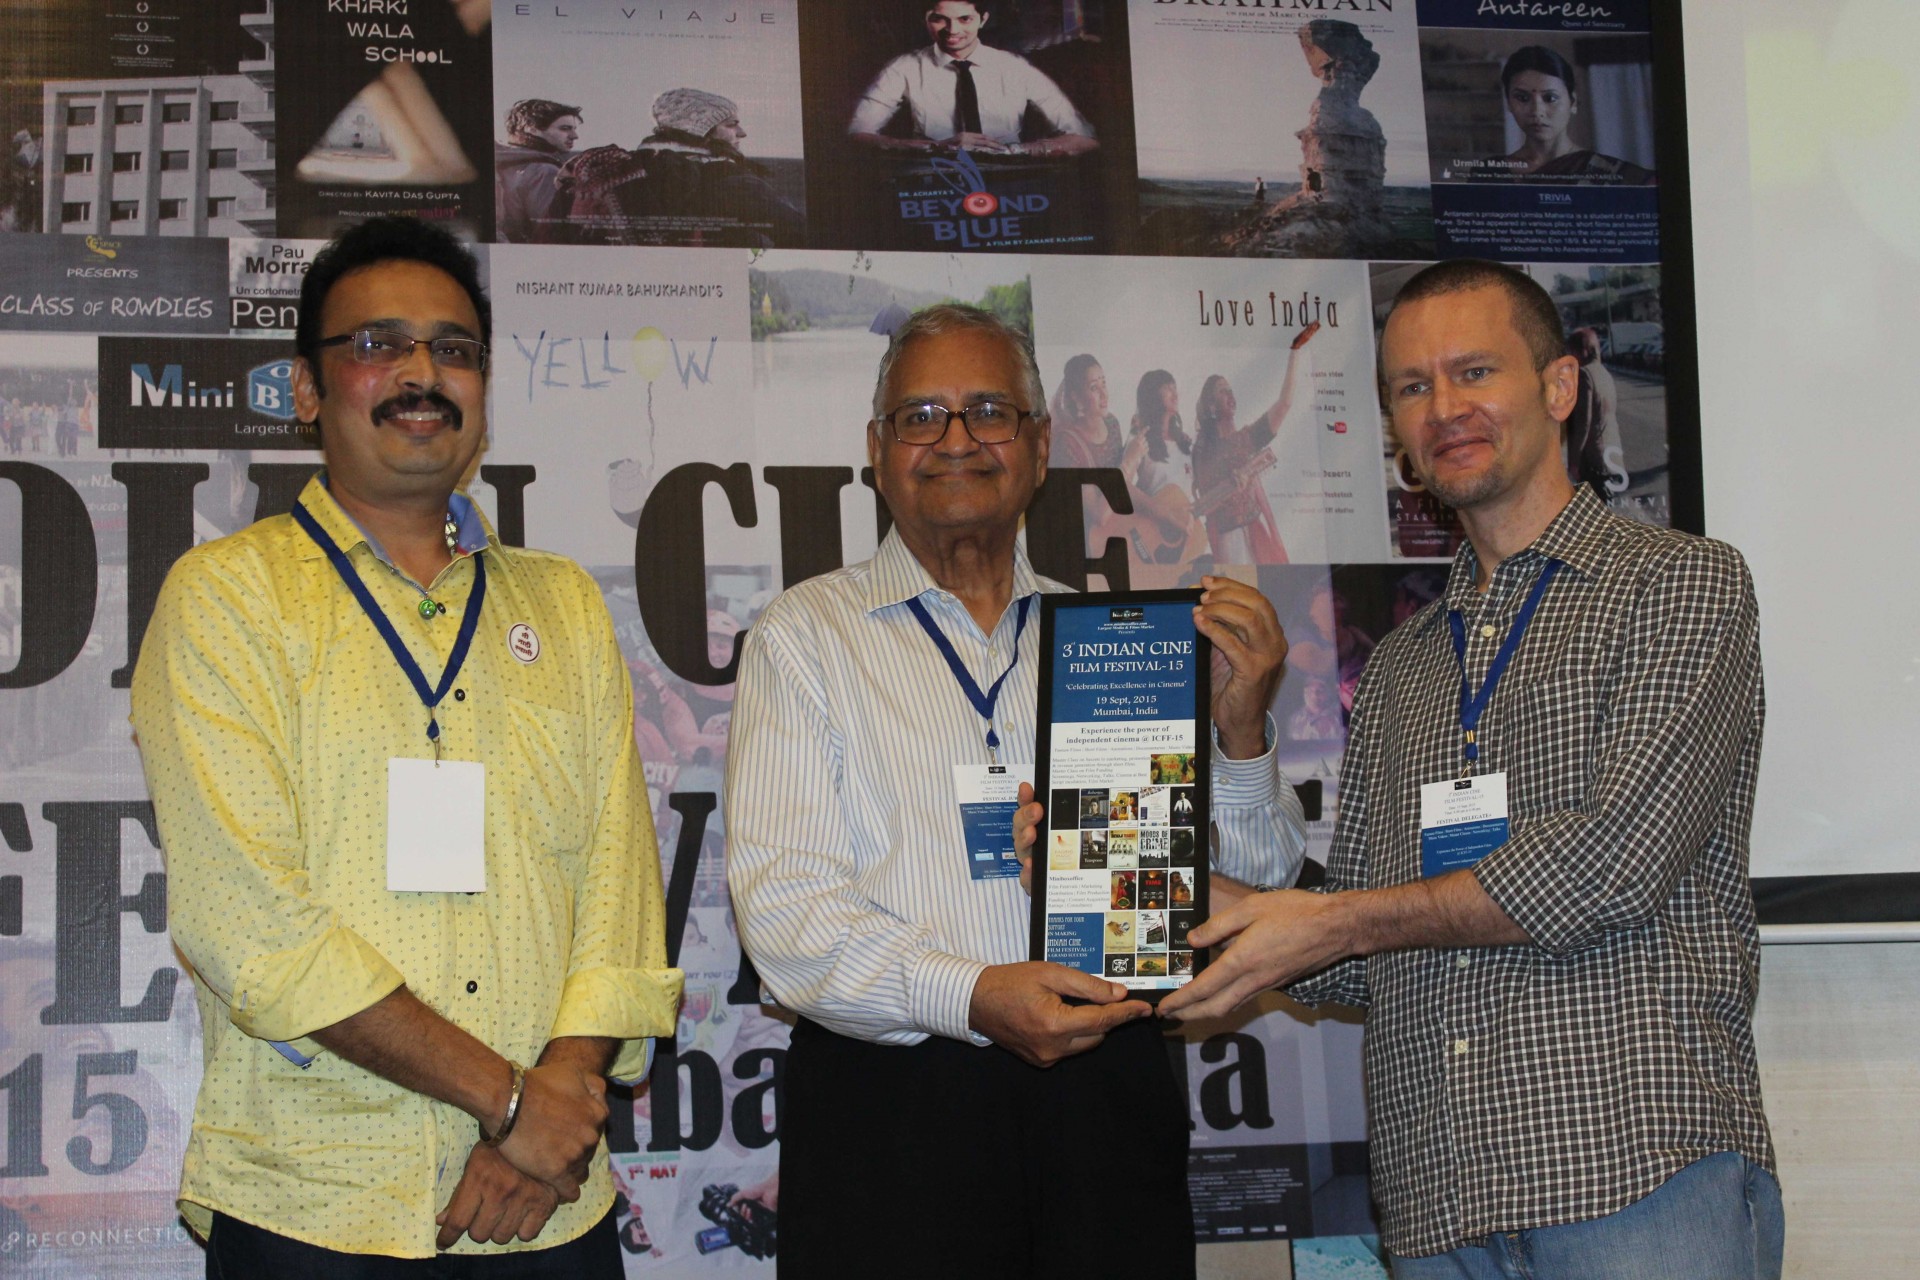 'Reconnection' wins Jury Special Mention award at Indian Cine Film Festival in Mumbai, India. The legend of Indian cinematograph G.L. Bhardwaj hands the award to Maksim Varfolomeev, film director.